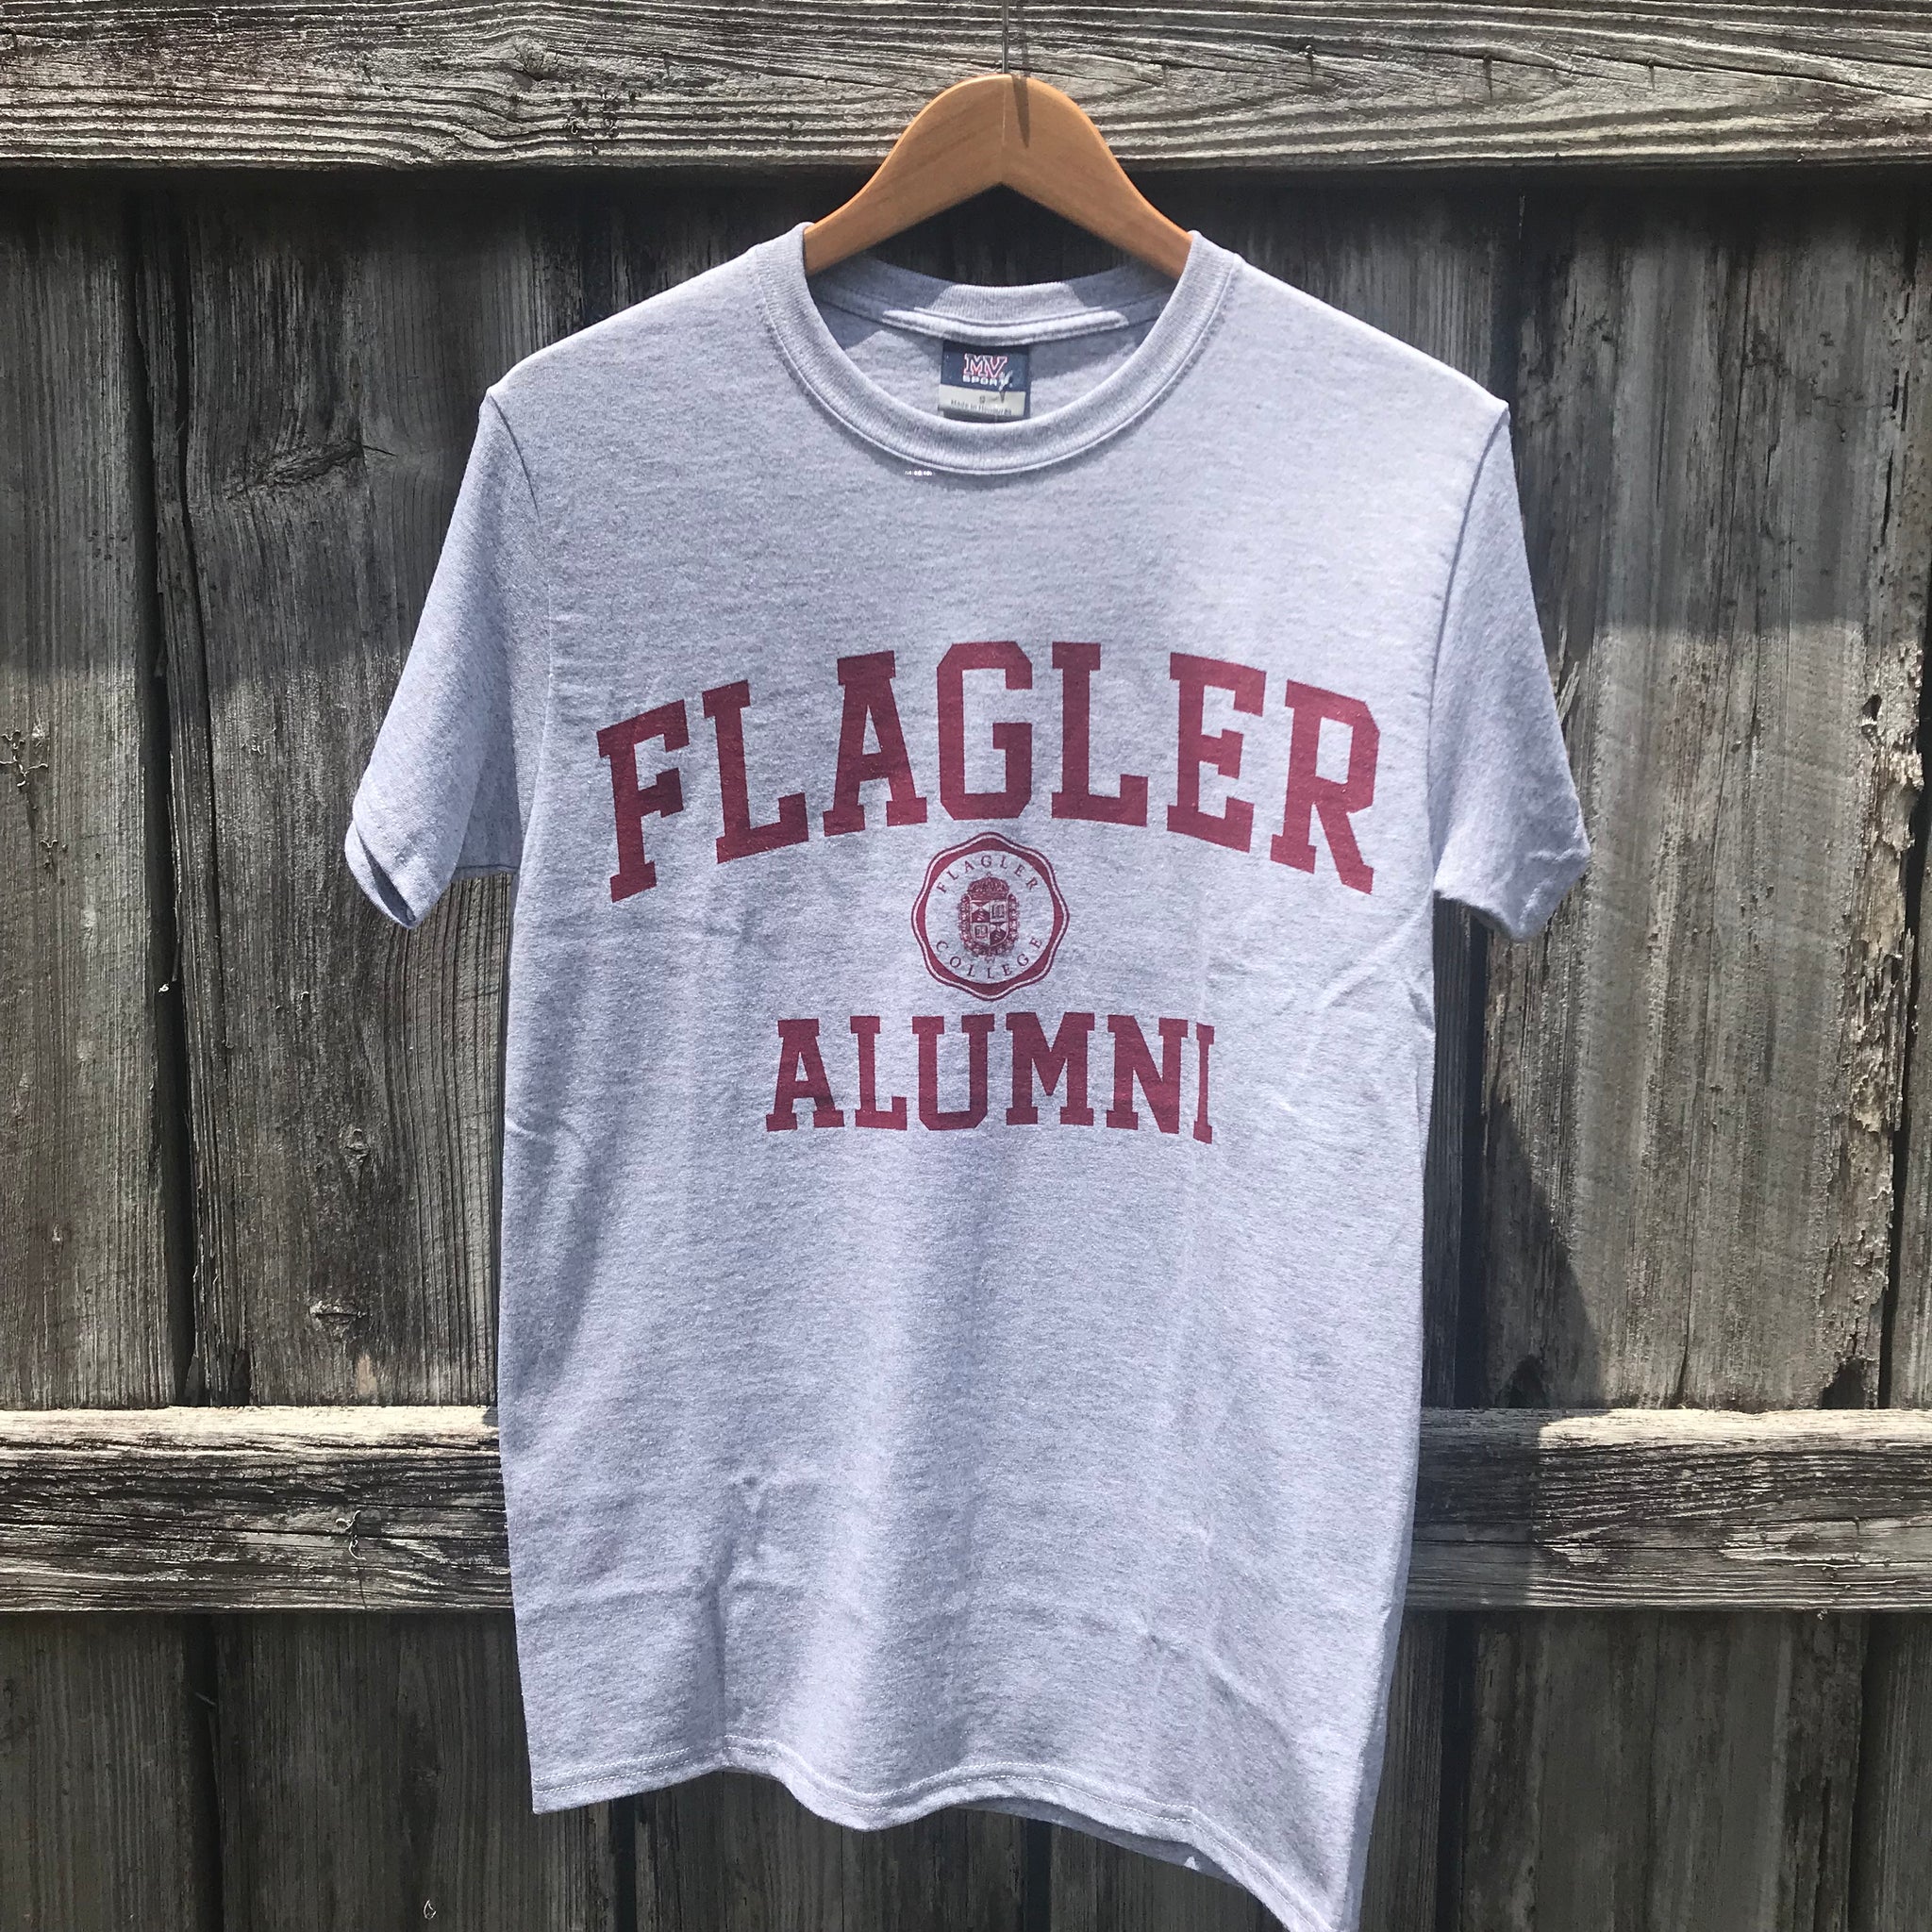 Grey t-shirt with Flagler alumni printed in red in middle of chest